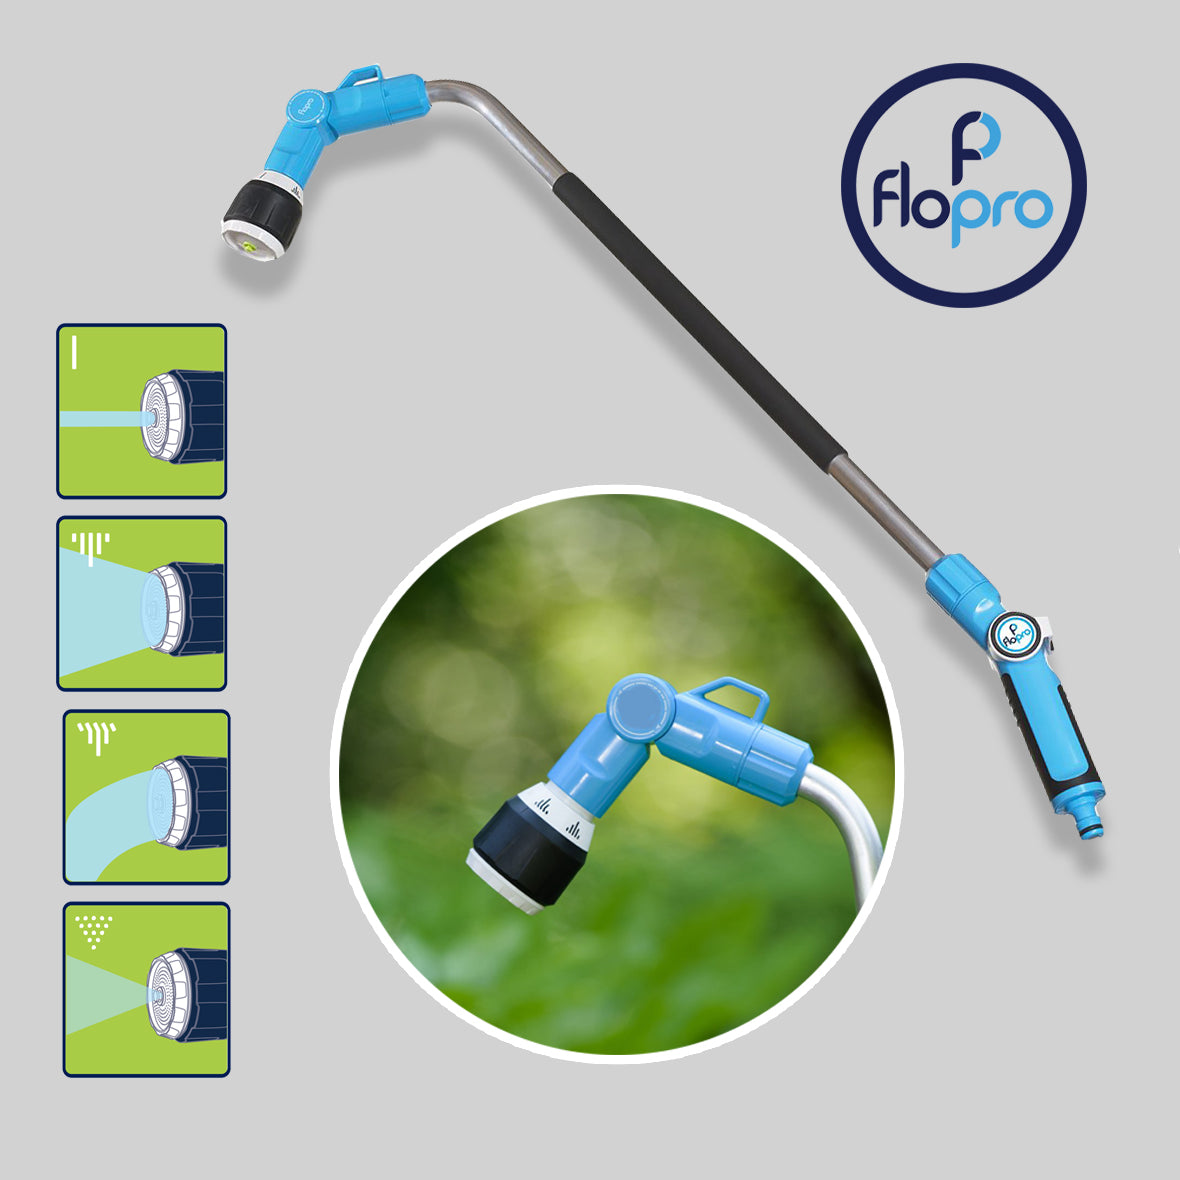 Activ Watering Lance by Flopro, sold by In-Excess